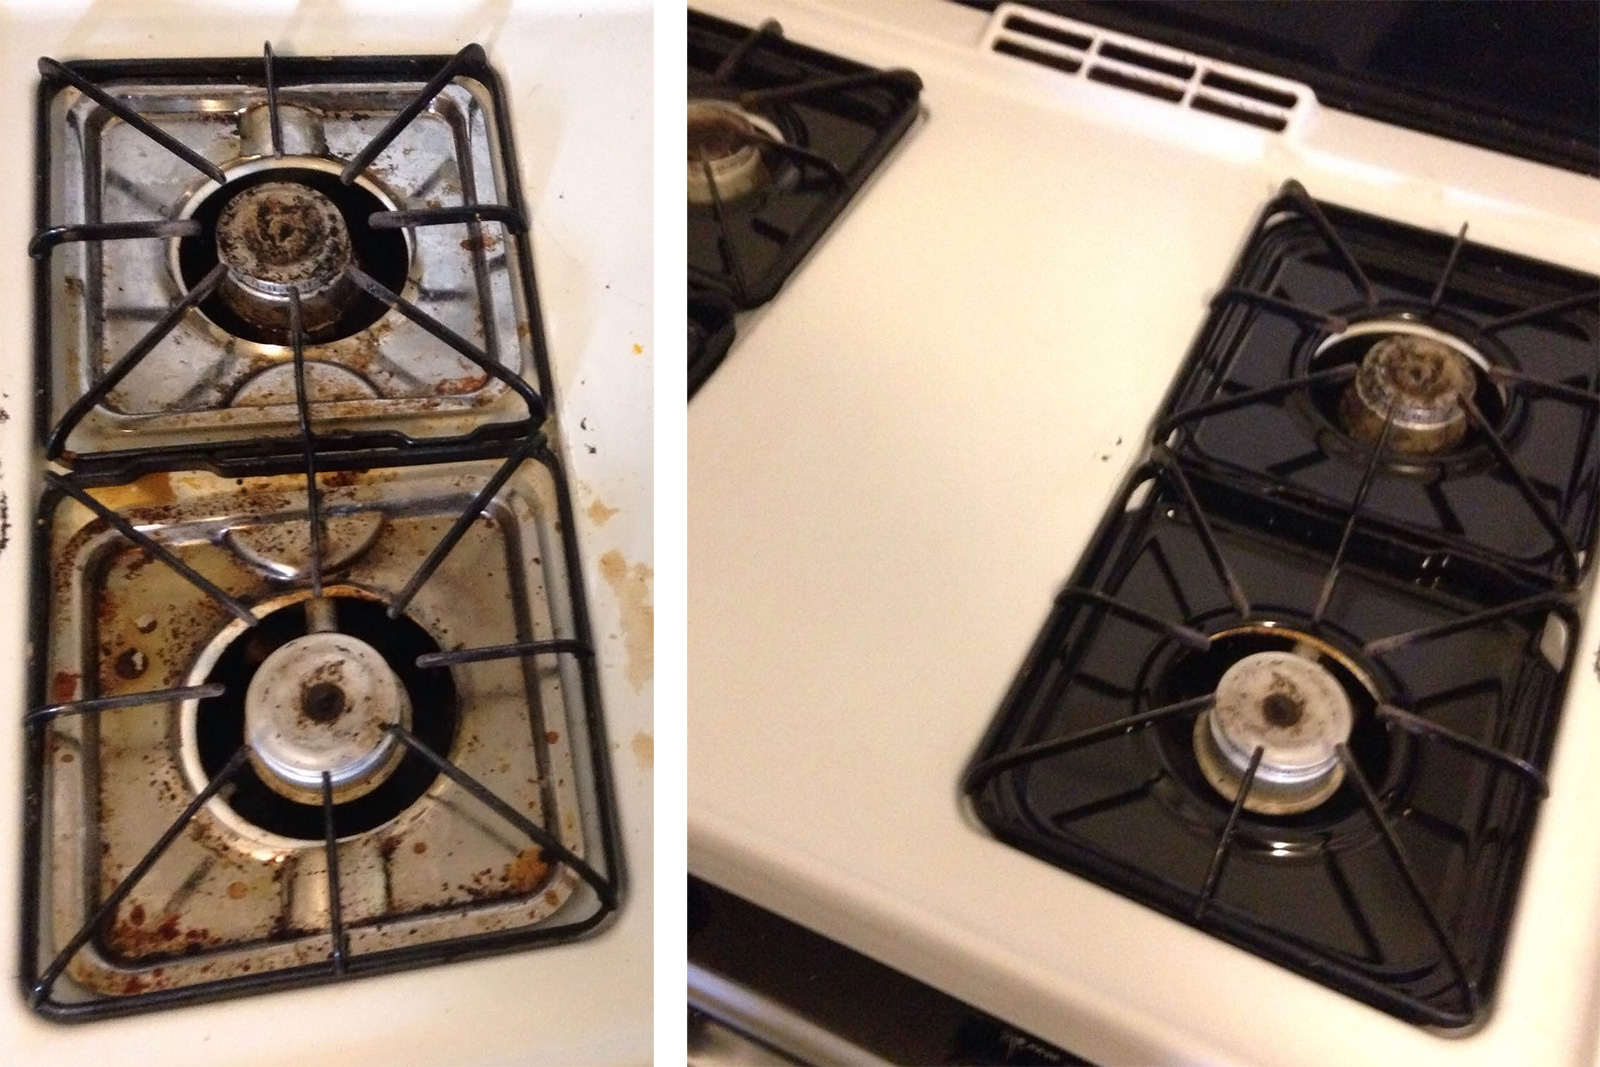 Appliance Cleaning Tips  Clean Kitchen Appliances the Easy Way